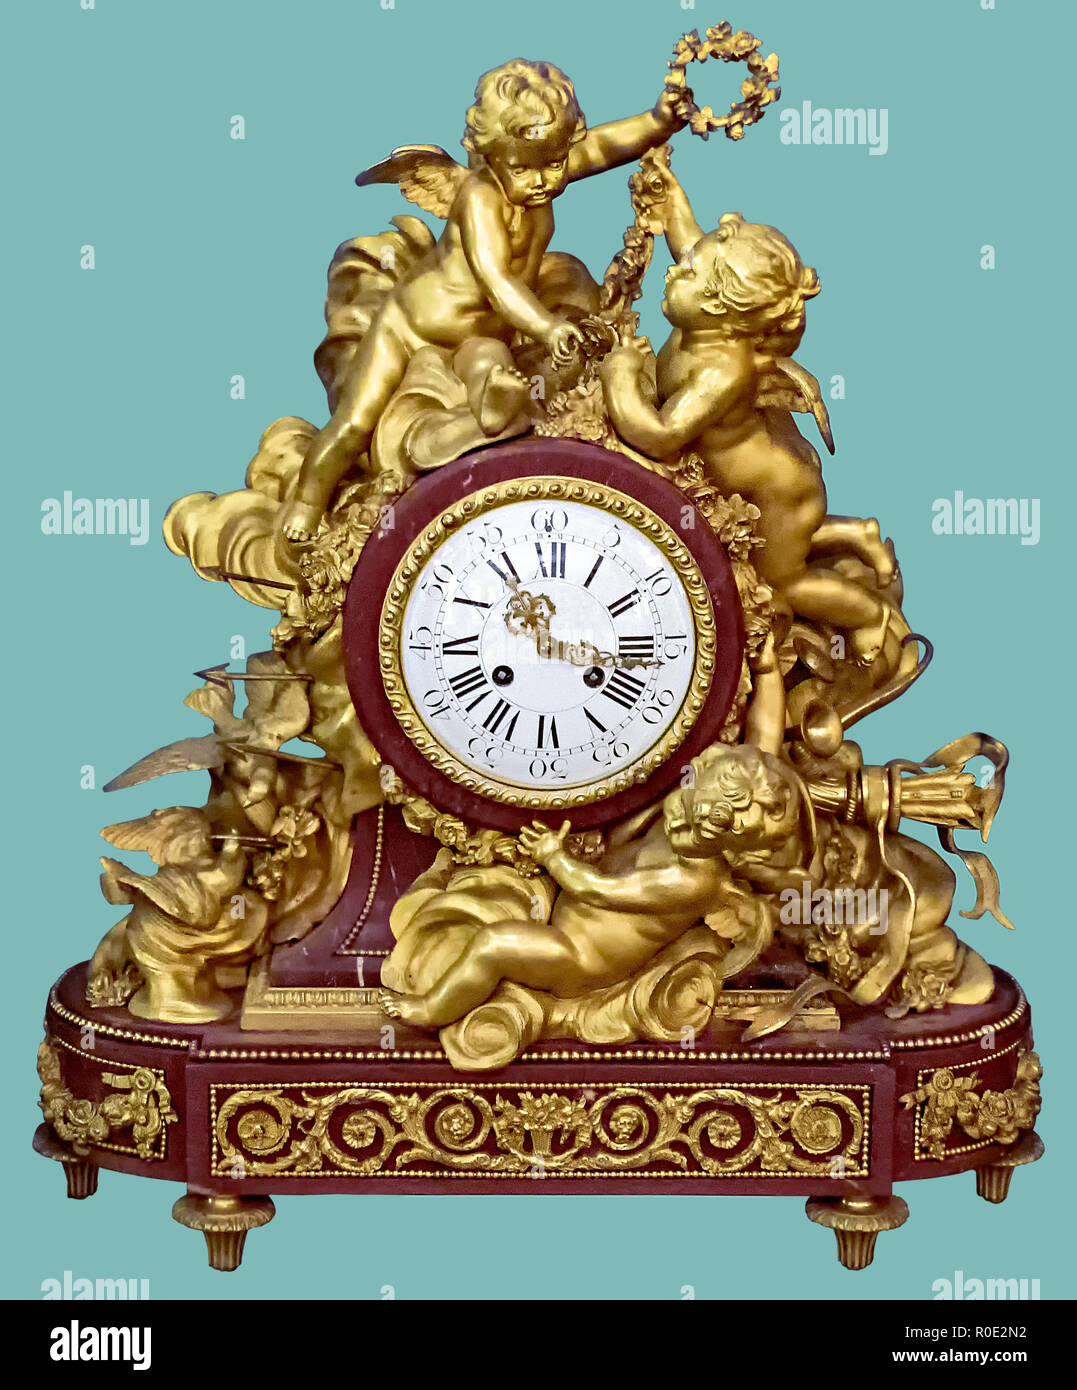 Antique mantel clock of golden cupid and angel statuettes, on isolated green background with clipping path. Stock Photo